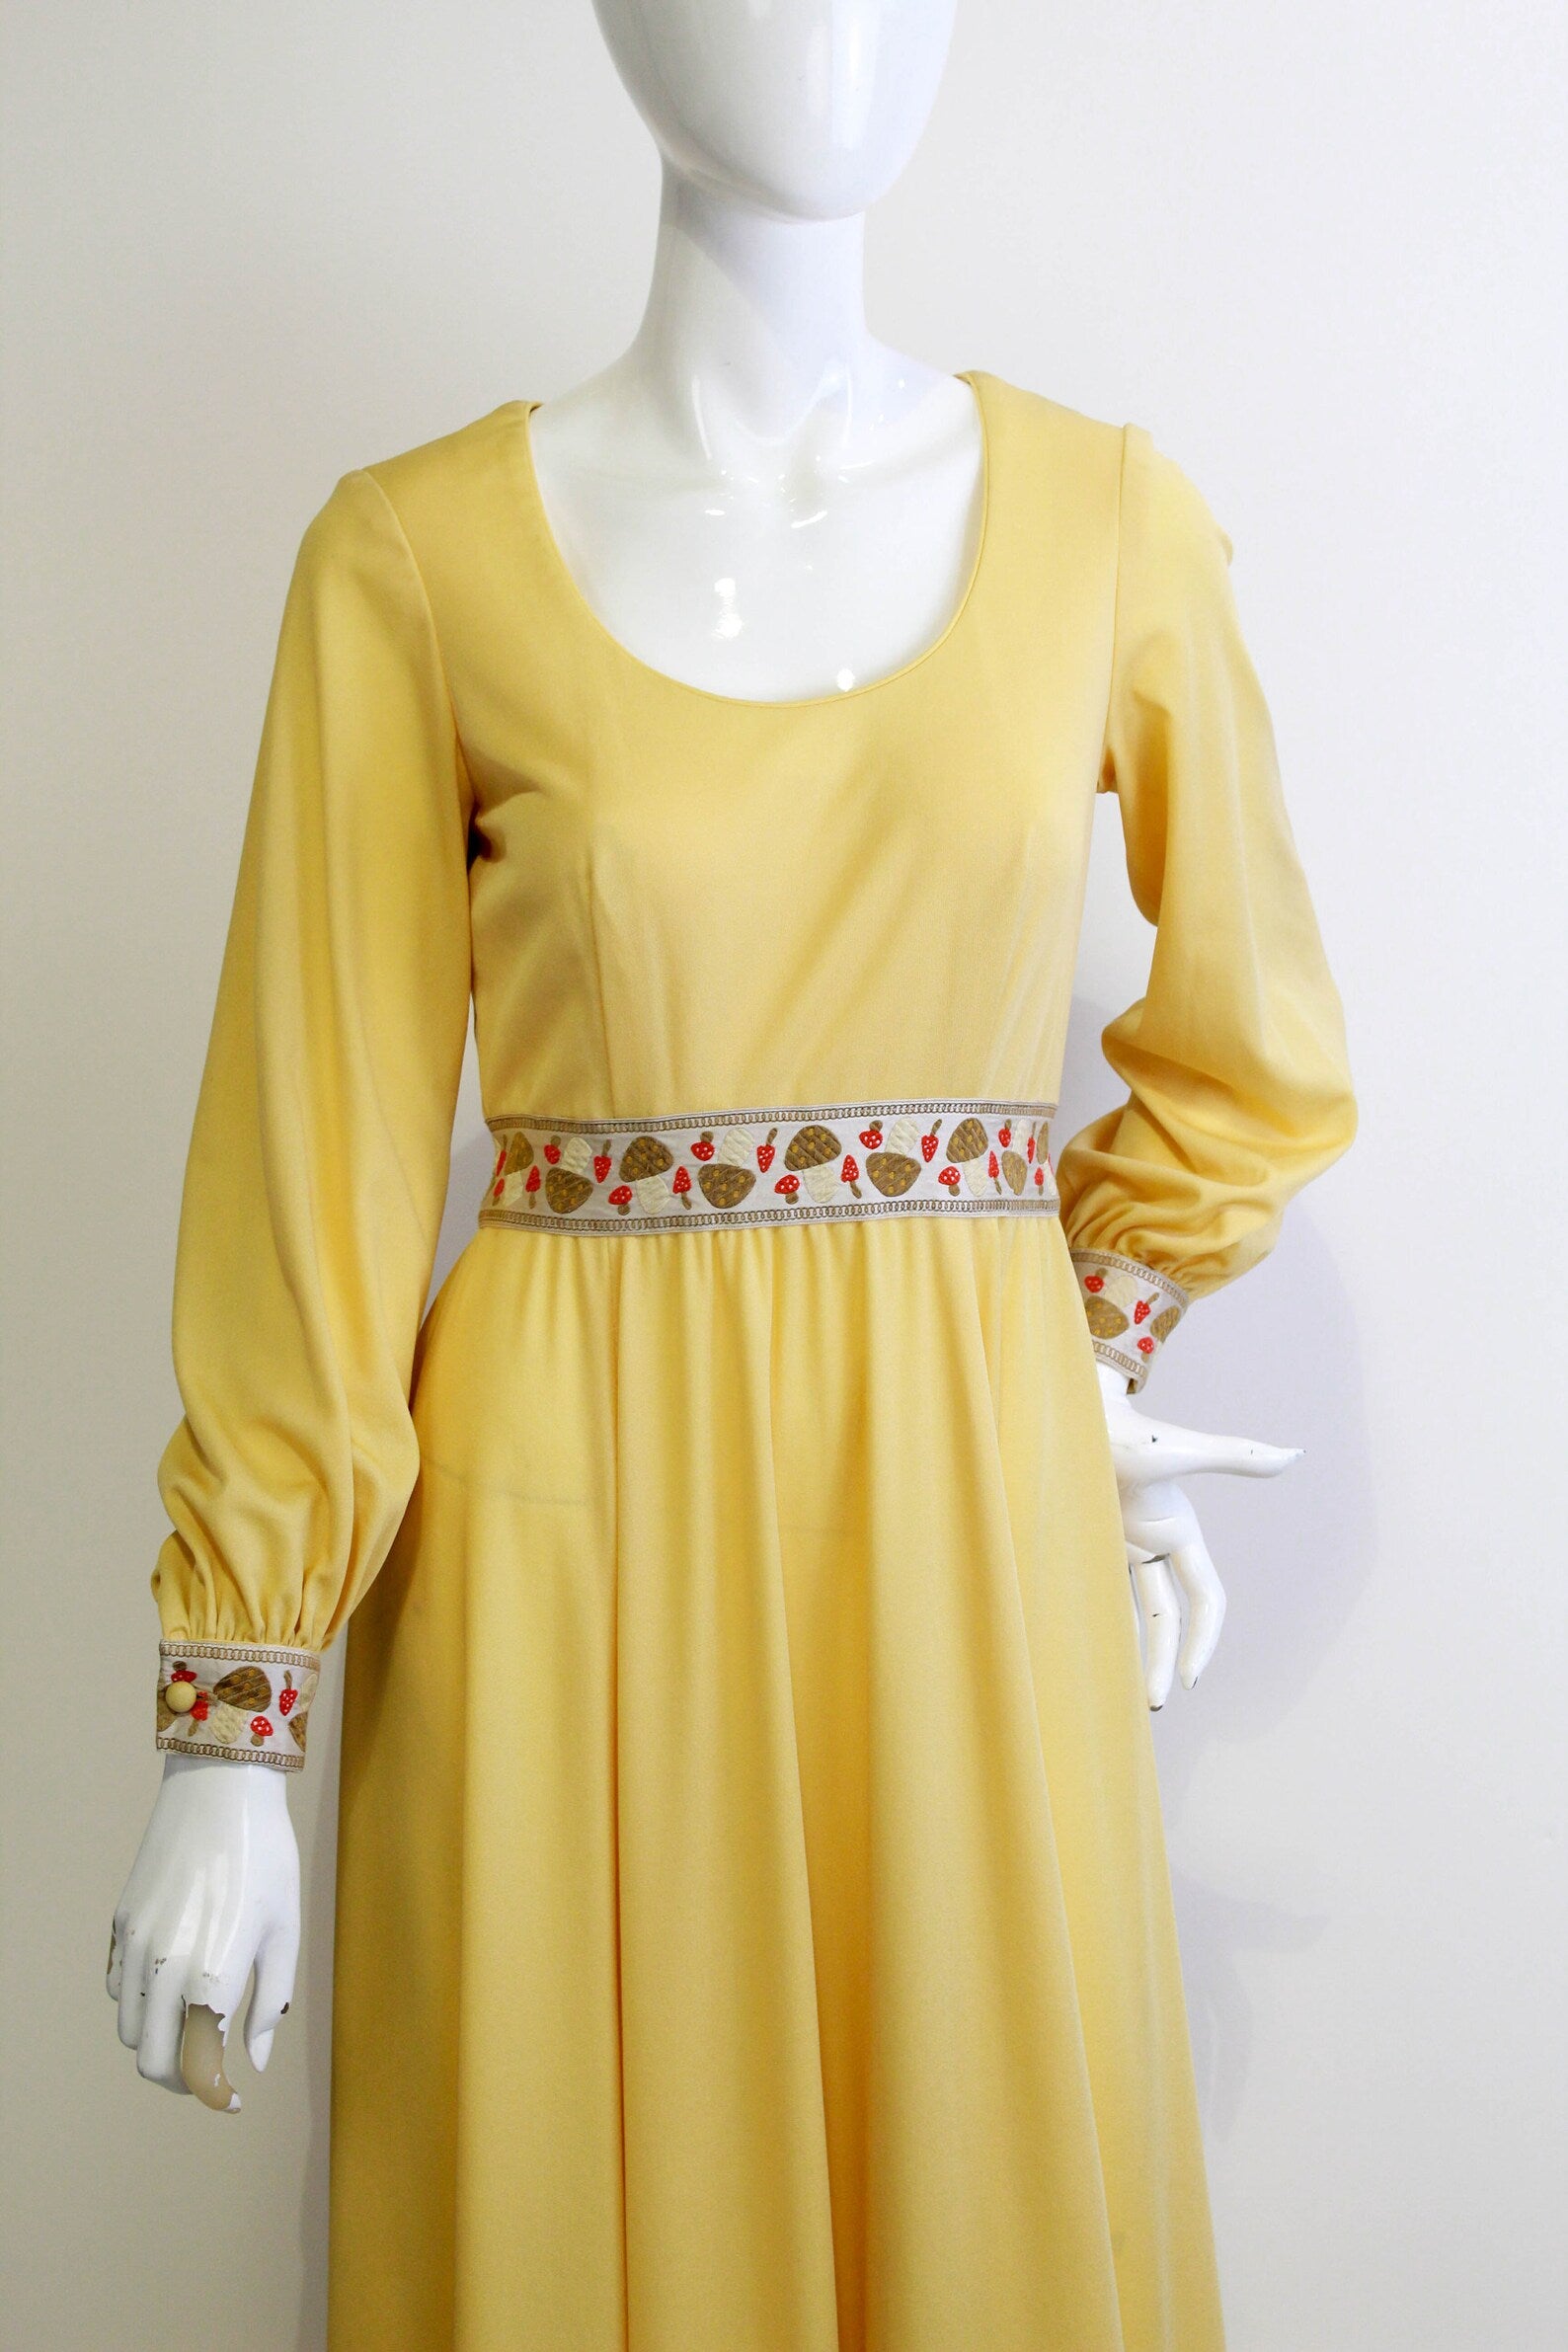 1970s Julie MIller of California Yellow Maxi Dress with Long Puffed Sleeves, Mushroom Embroidered Waist and Cuffs